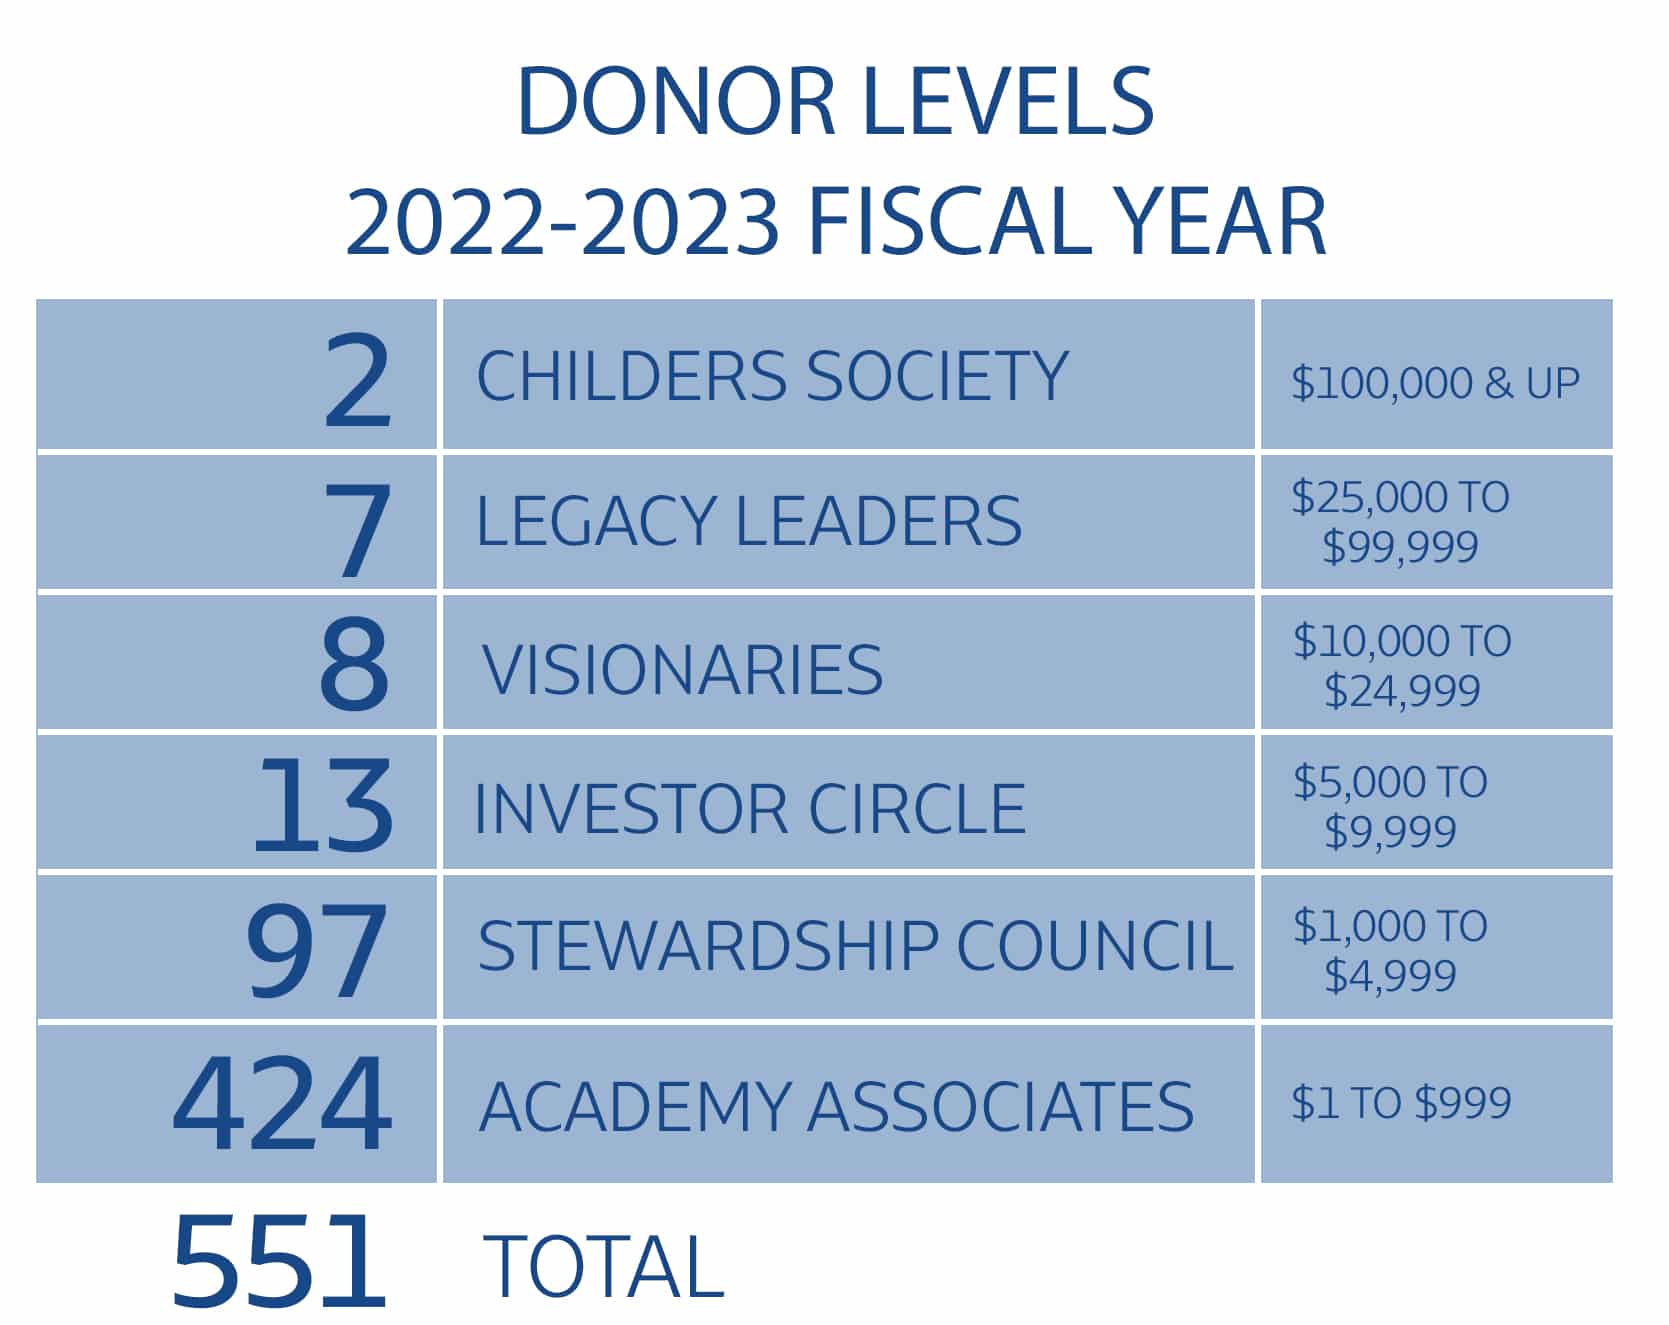 Christian Academy School System | Support | Our Donors | 2022-2023